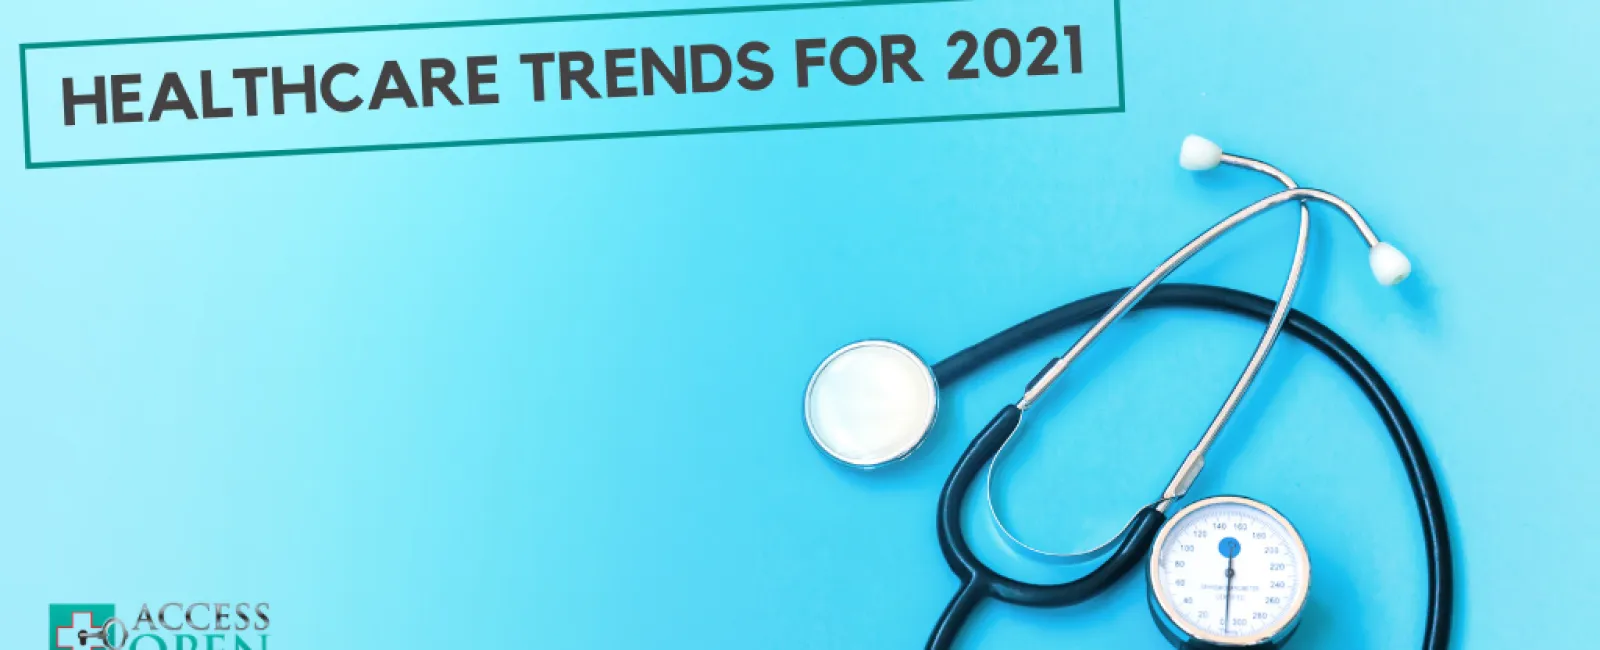 Healthcare Trends for 2021